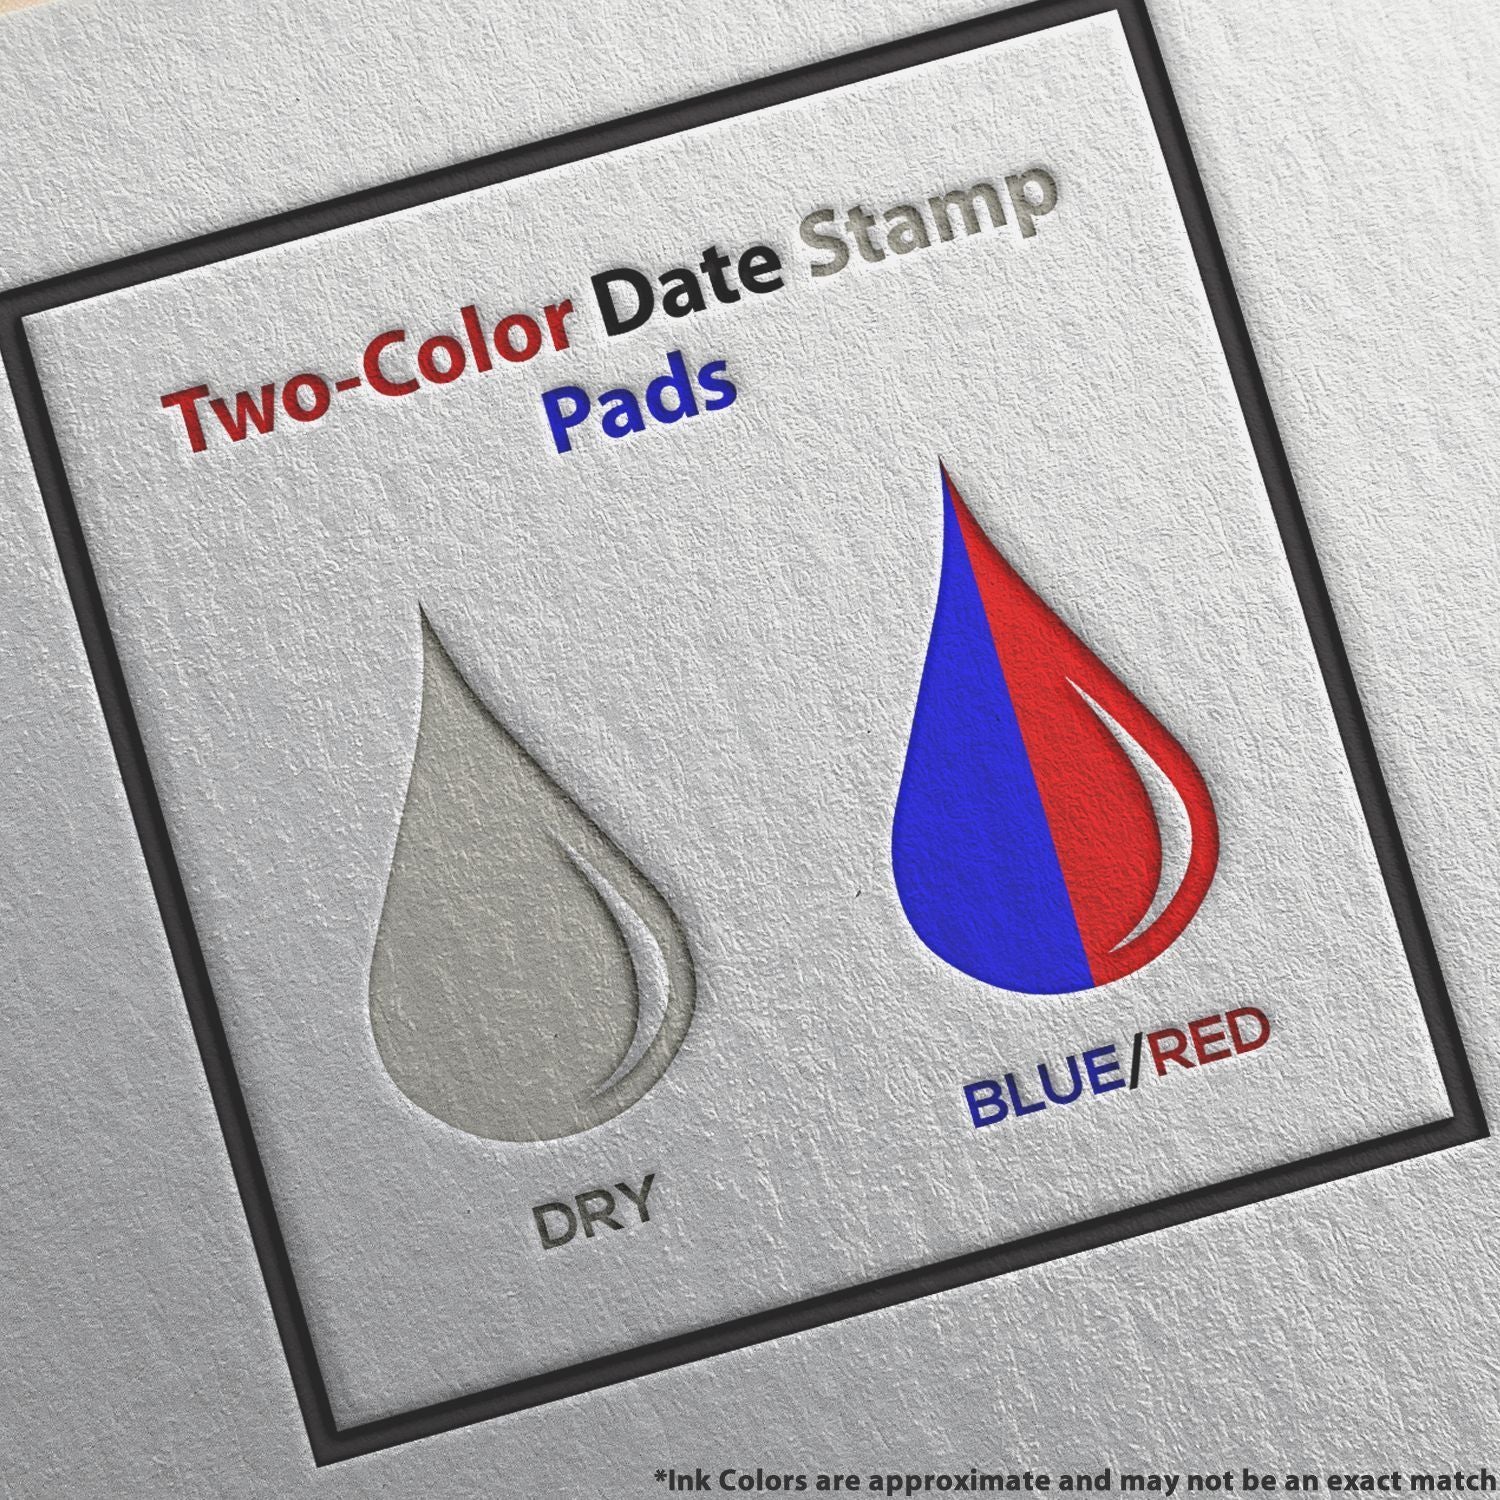 A Two Color Replacement Ink Pad for 5440 Trodat Stamp showing its availability in blue/red colors.